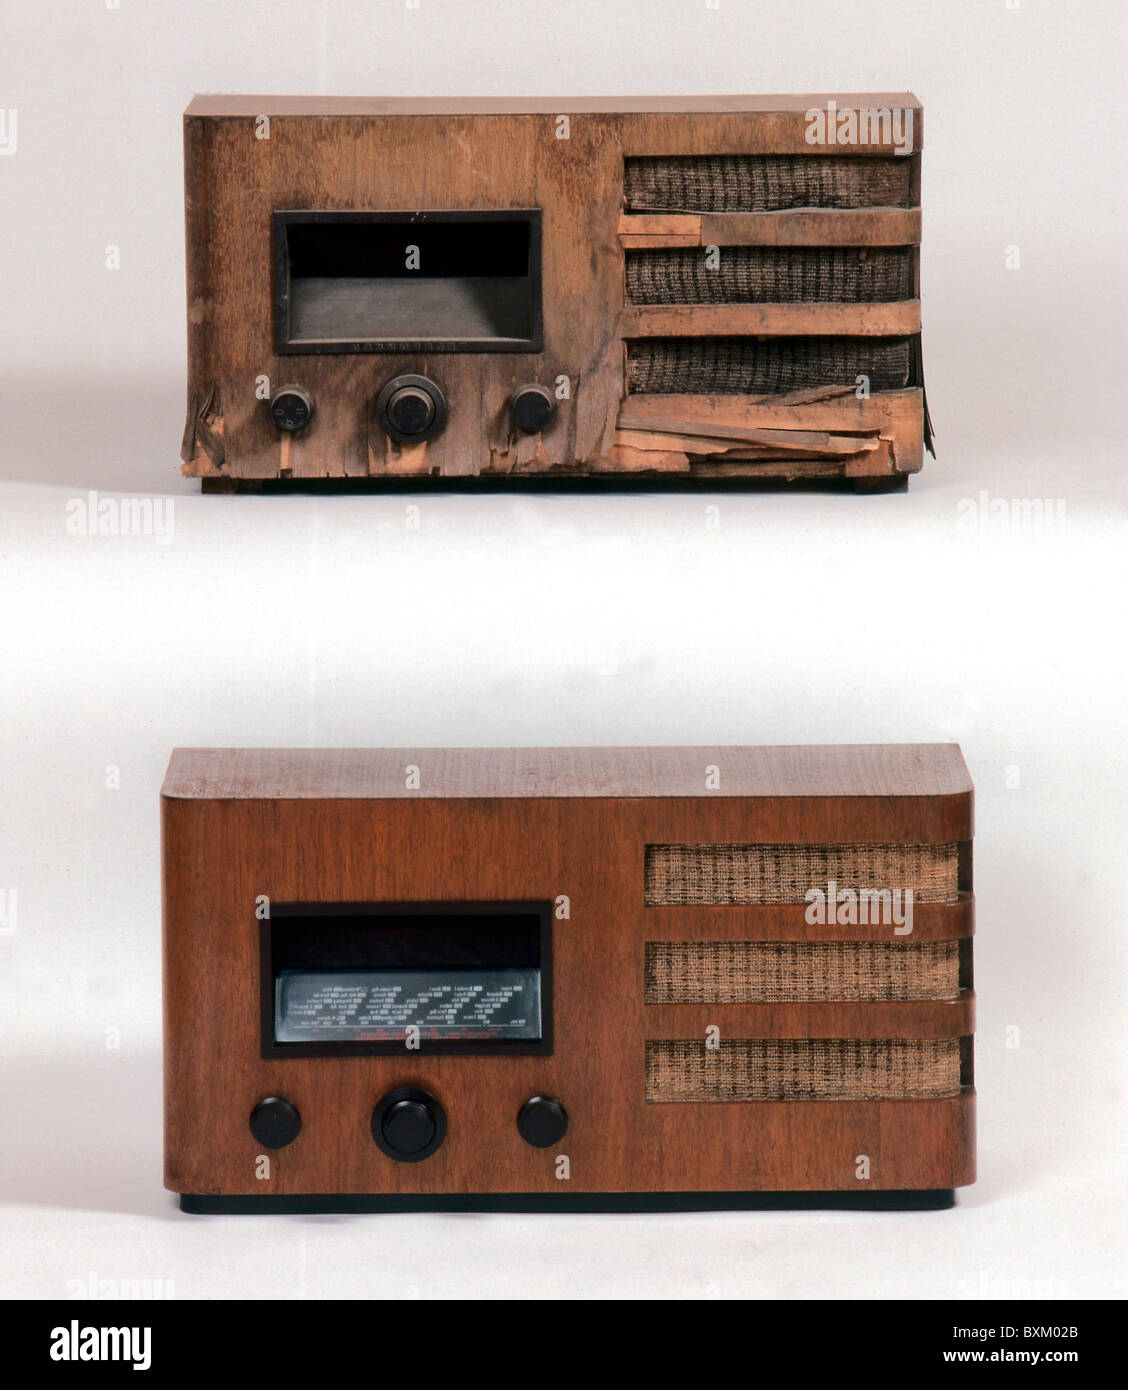 broadcast, radio, radio set Telefunken T 512, Additional-Rights-Clearences-Not Available Stock Photo